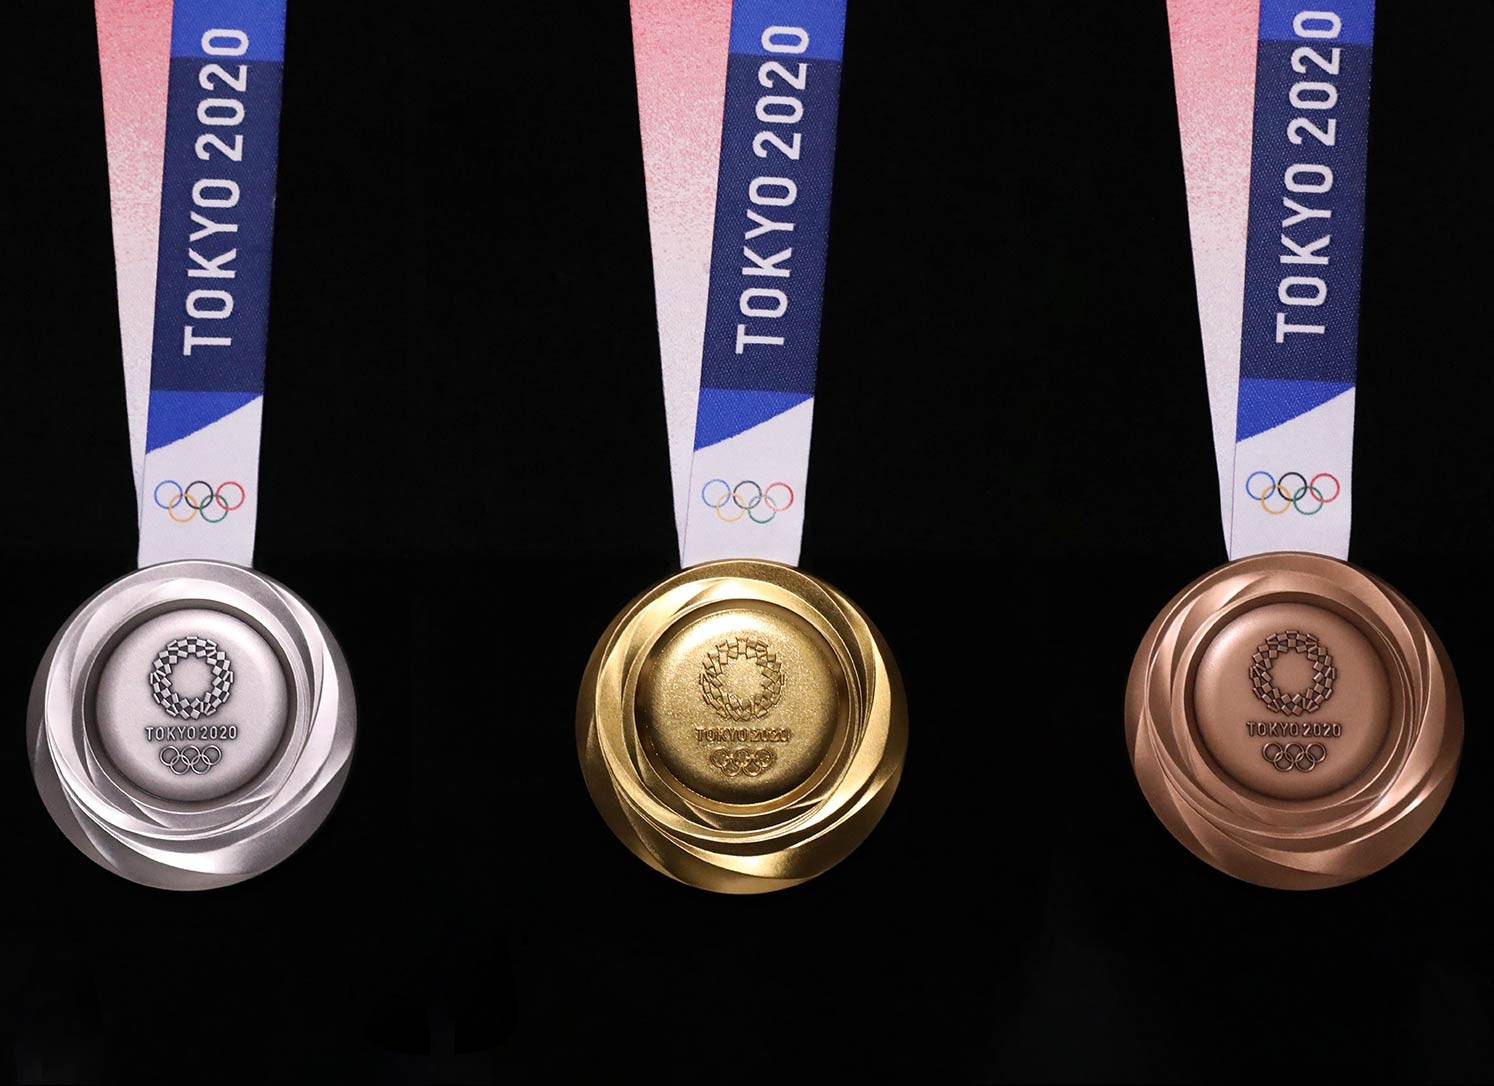 The Tokyo 2020 Olympic medal design has been unveiled